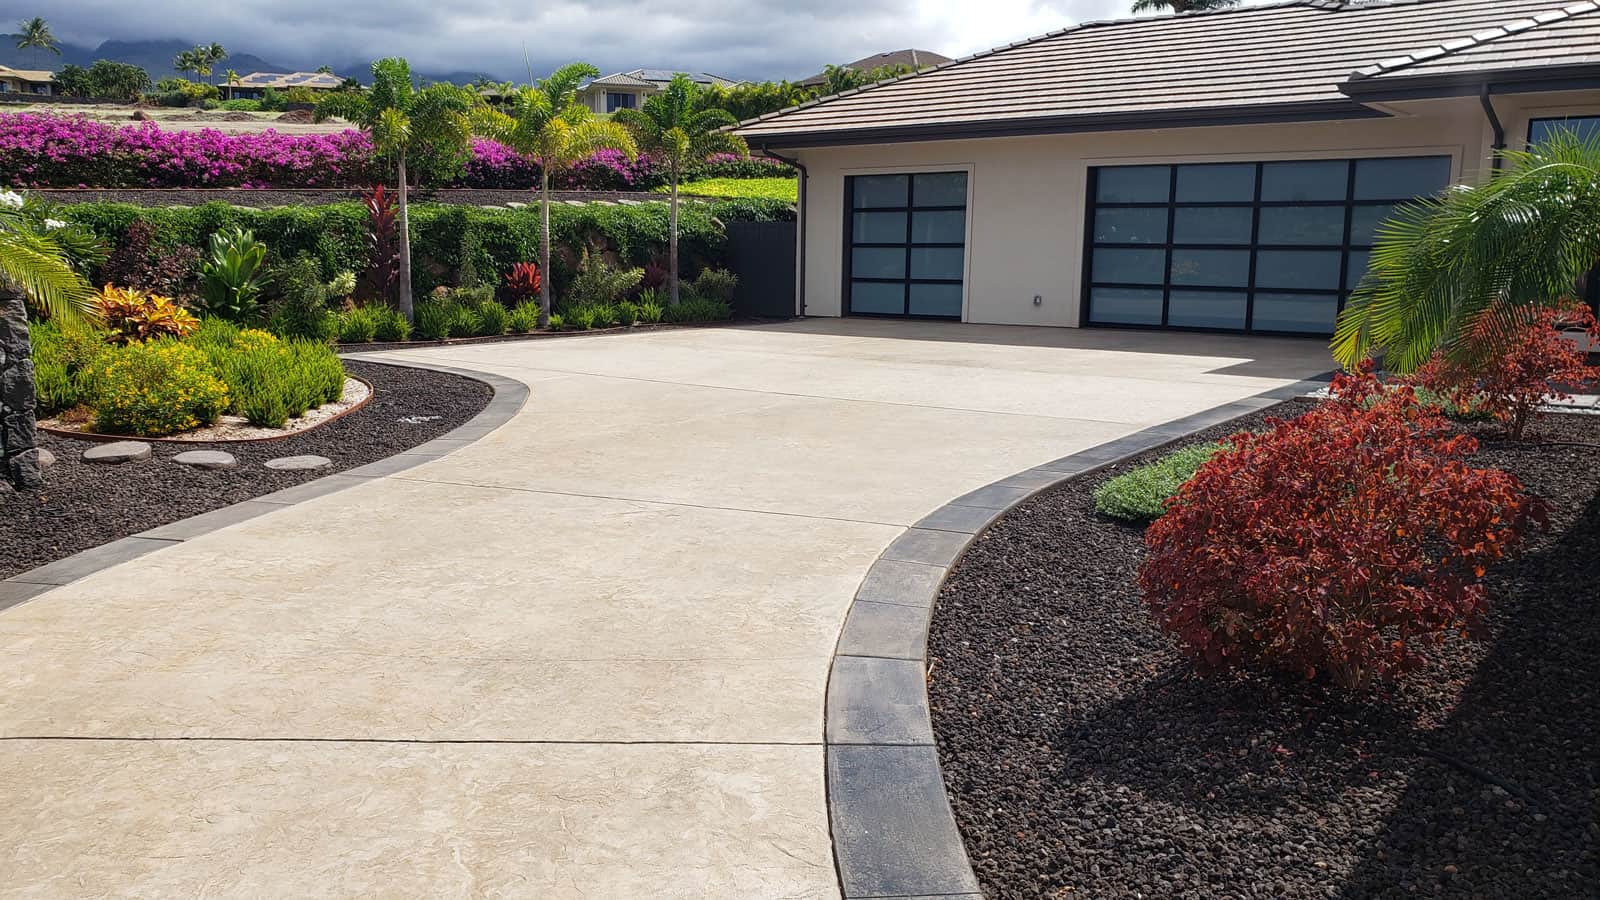 Stamped concrete driveway with concrete border, includes parking and garage